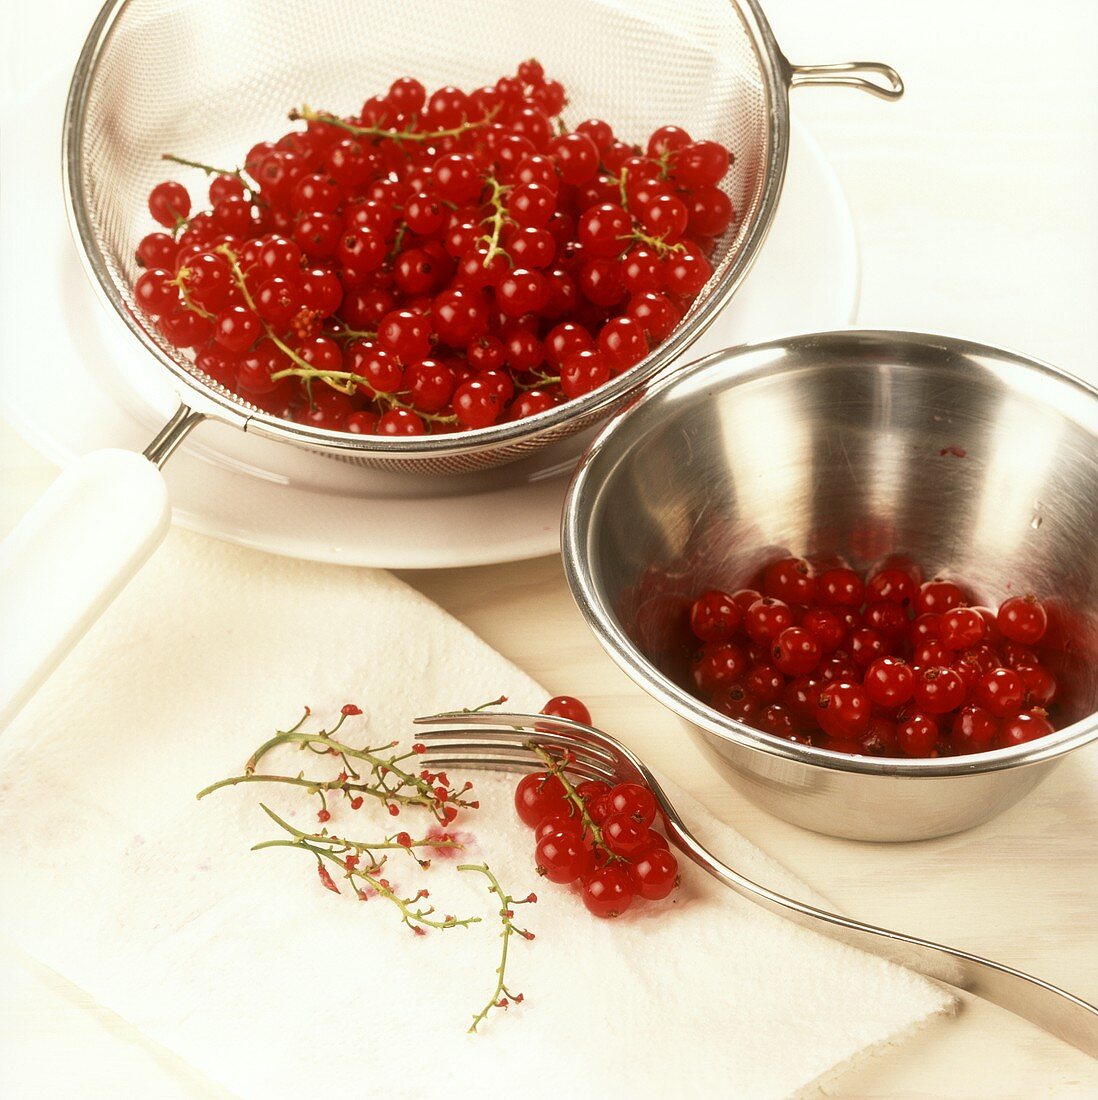 Redcurrants stripped from their stalks with a fork